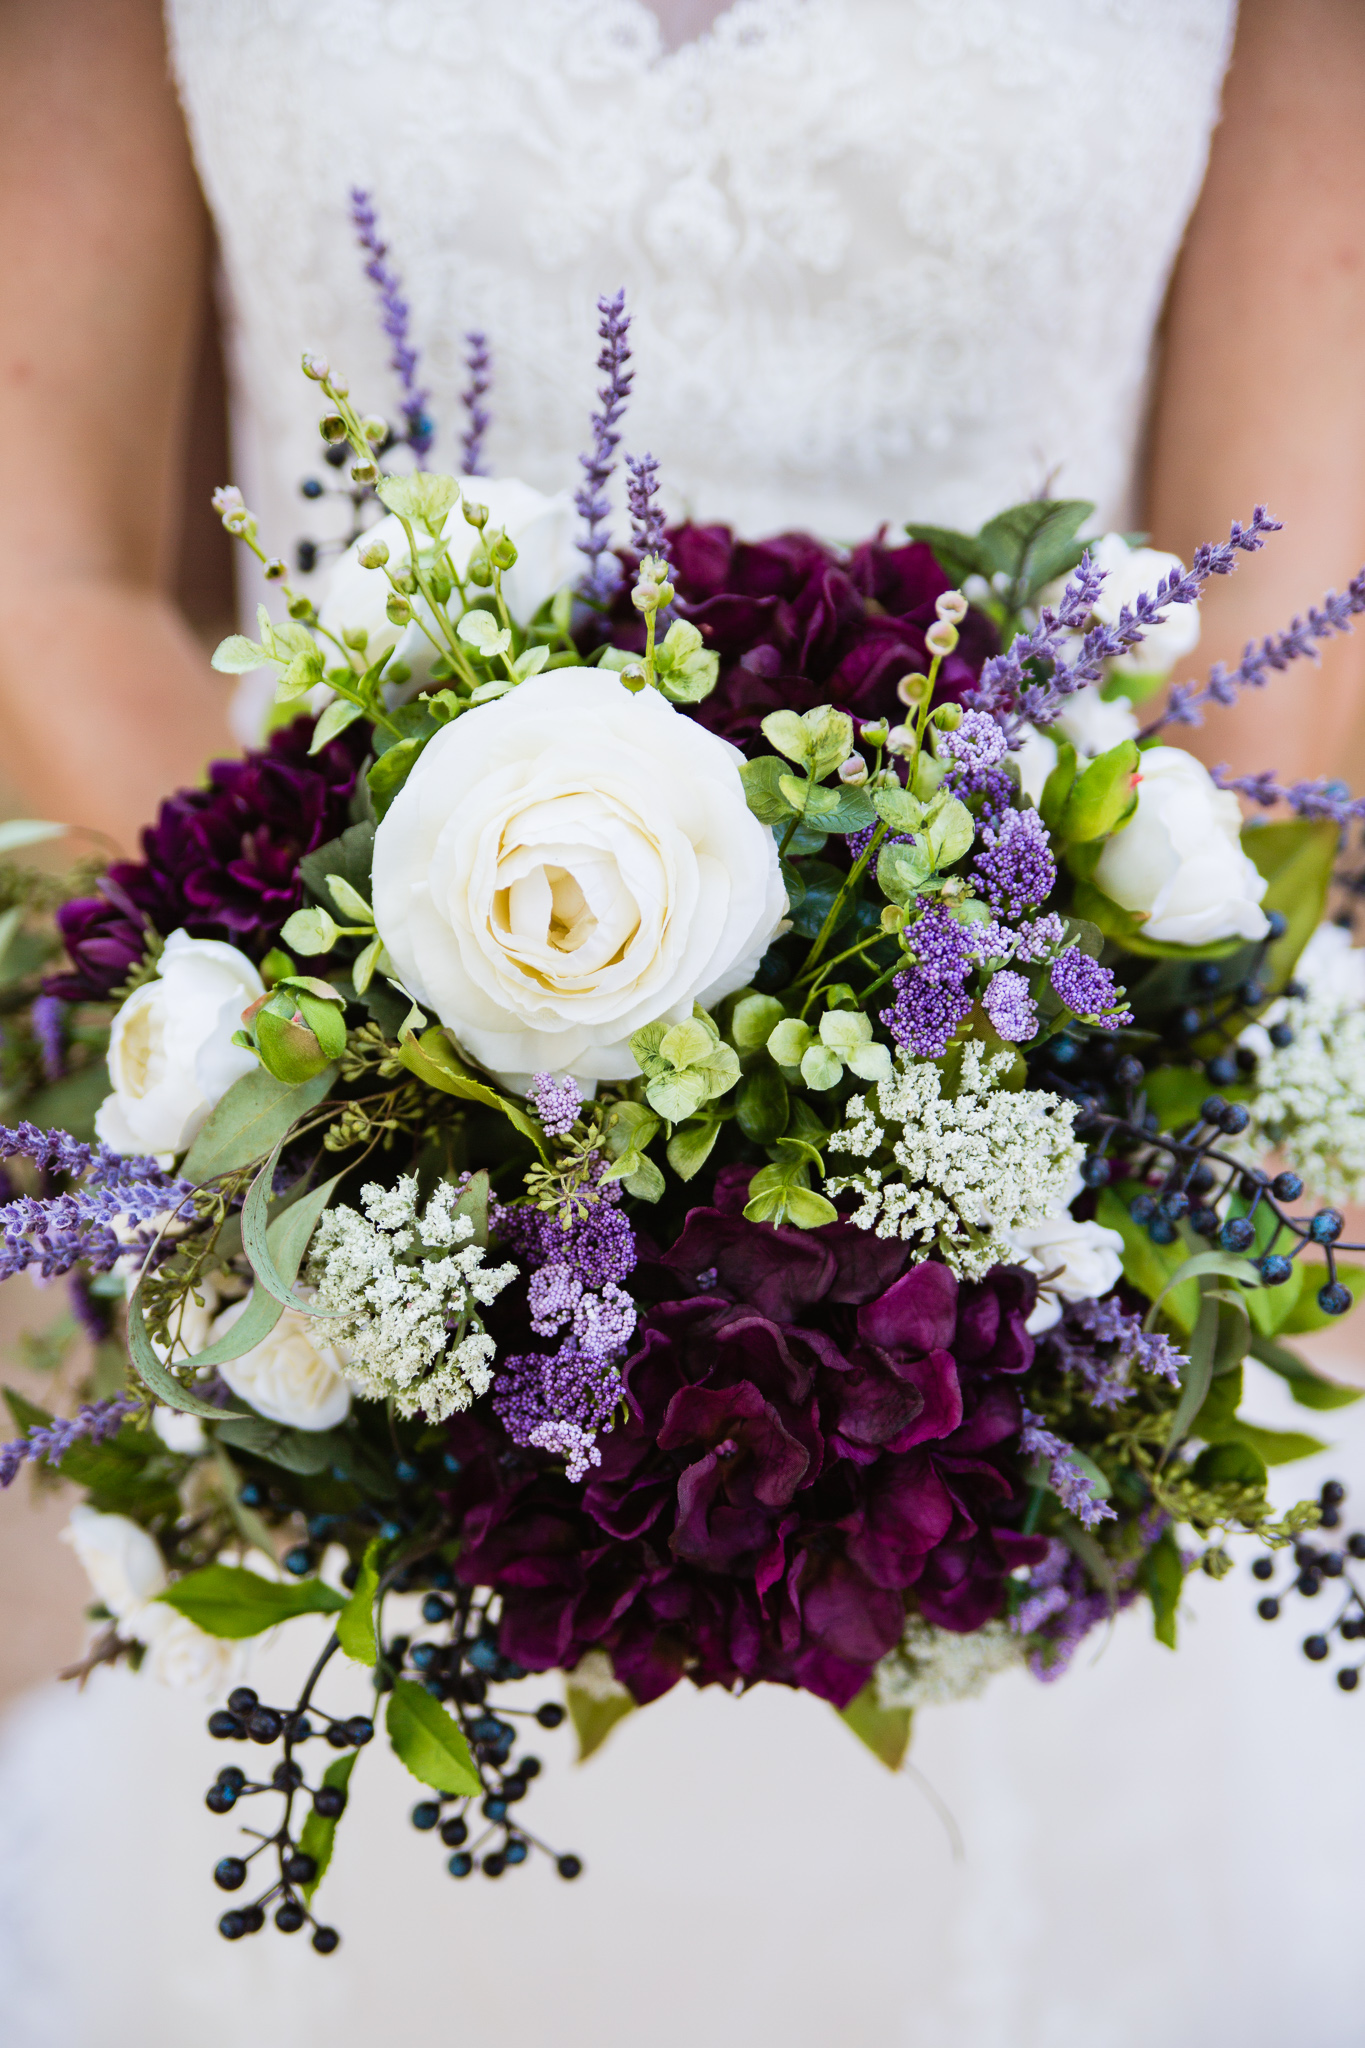 Purple, white, and green silk bridal bouquet by wedding photographer PMA Photography.